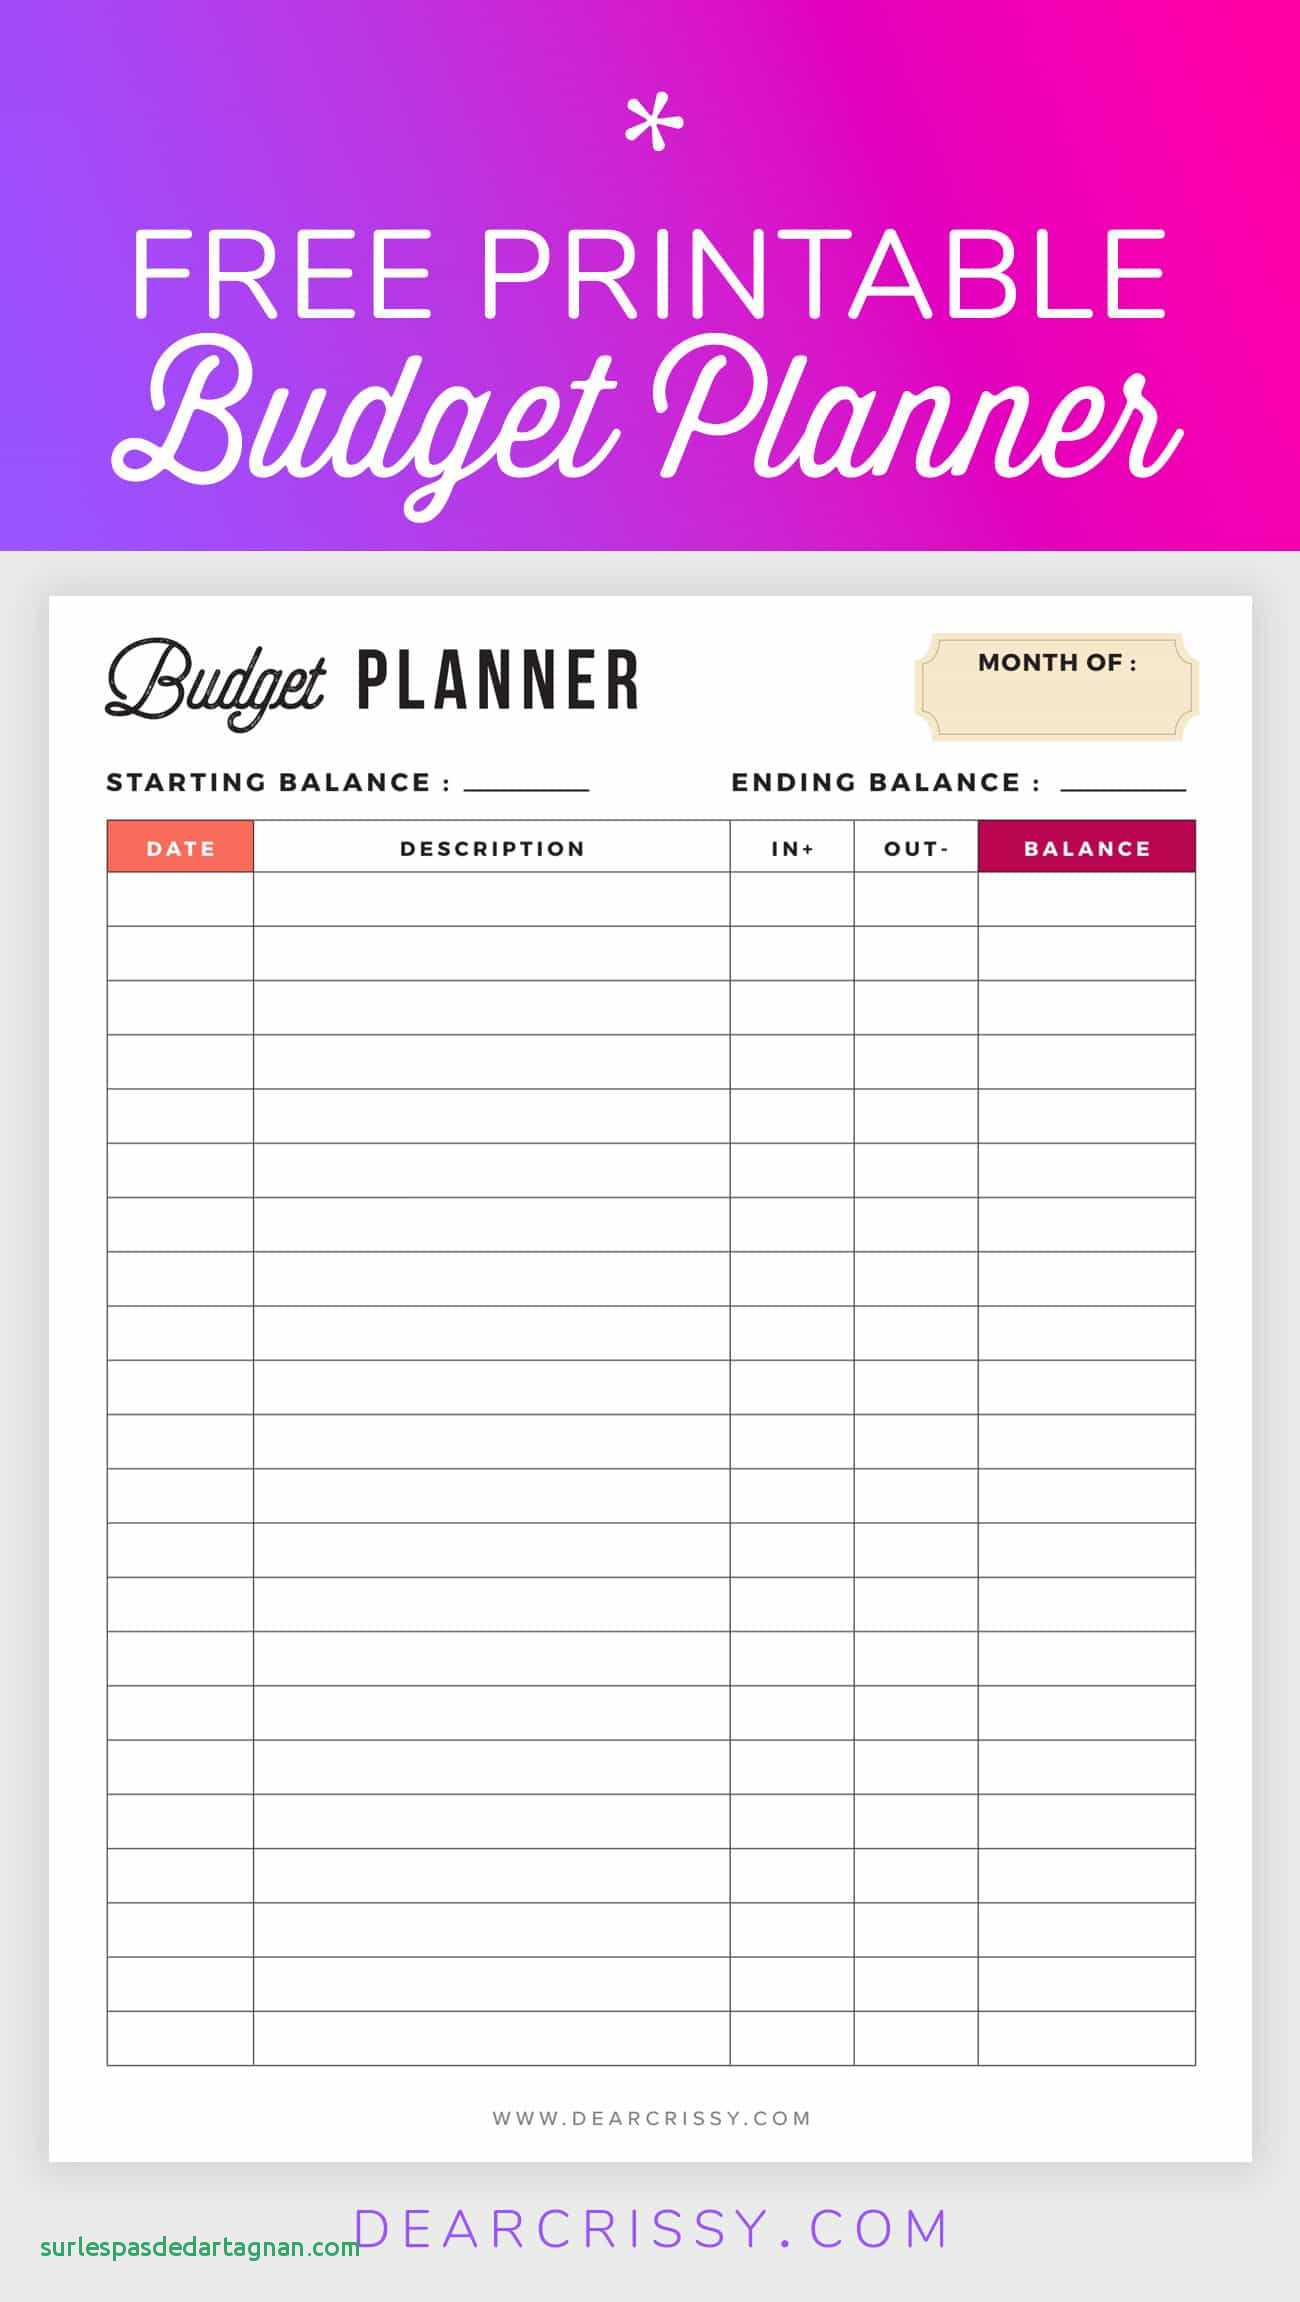 009 Template Ideas Monthly Budget Planner Free Diy Bud Idealstalist - Free Printable Budget Planner Uk